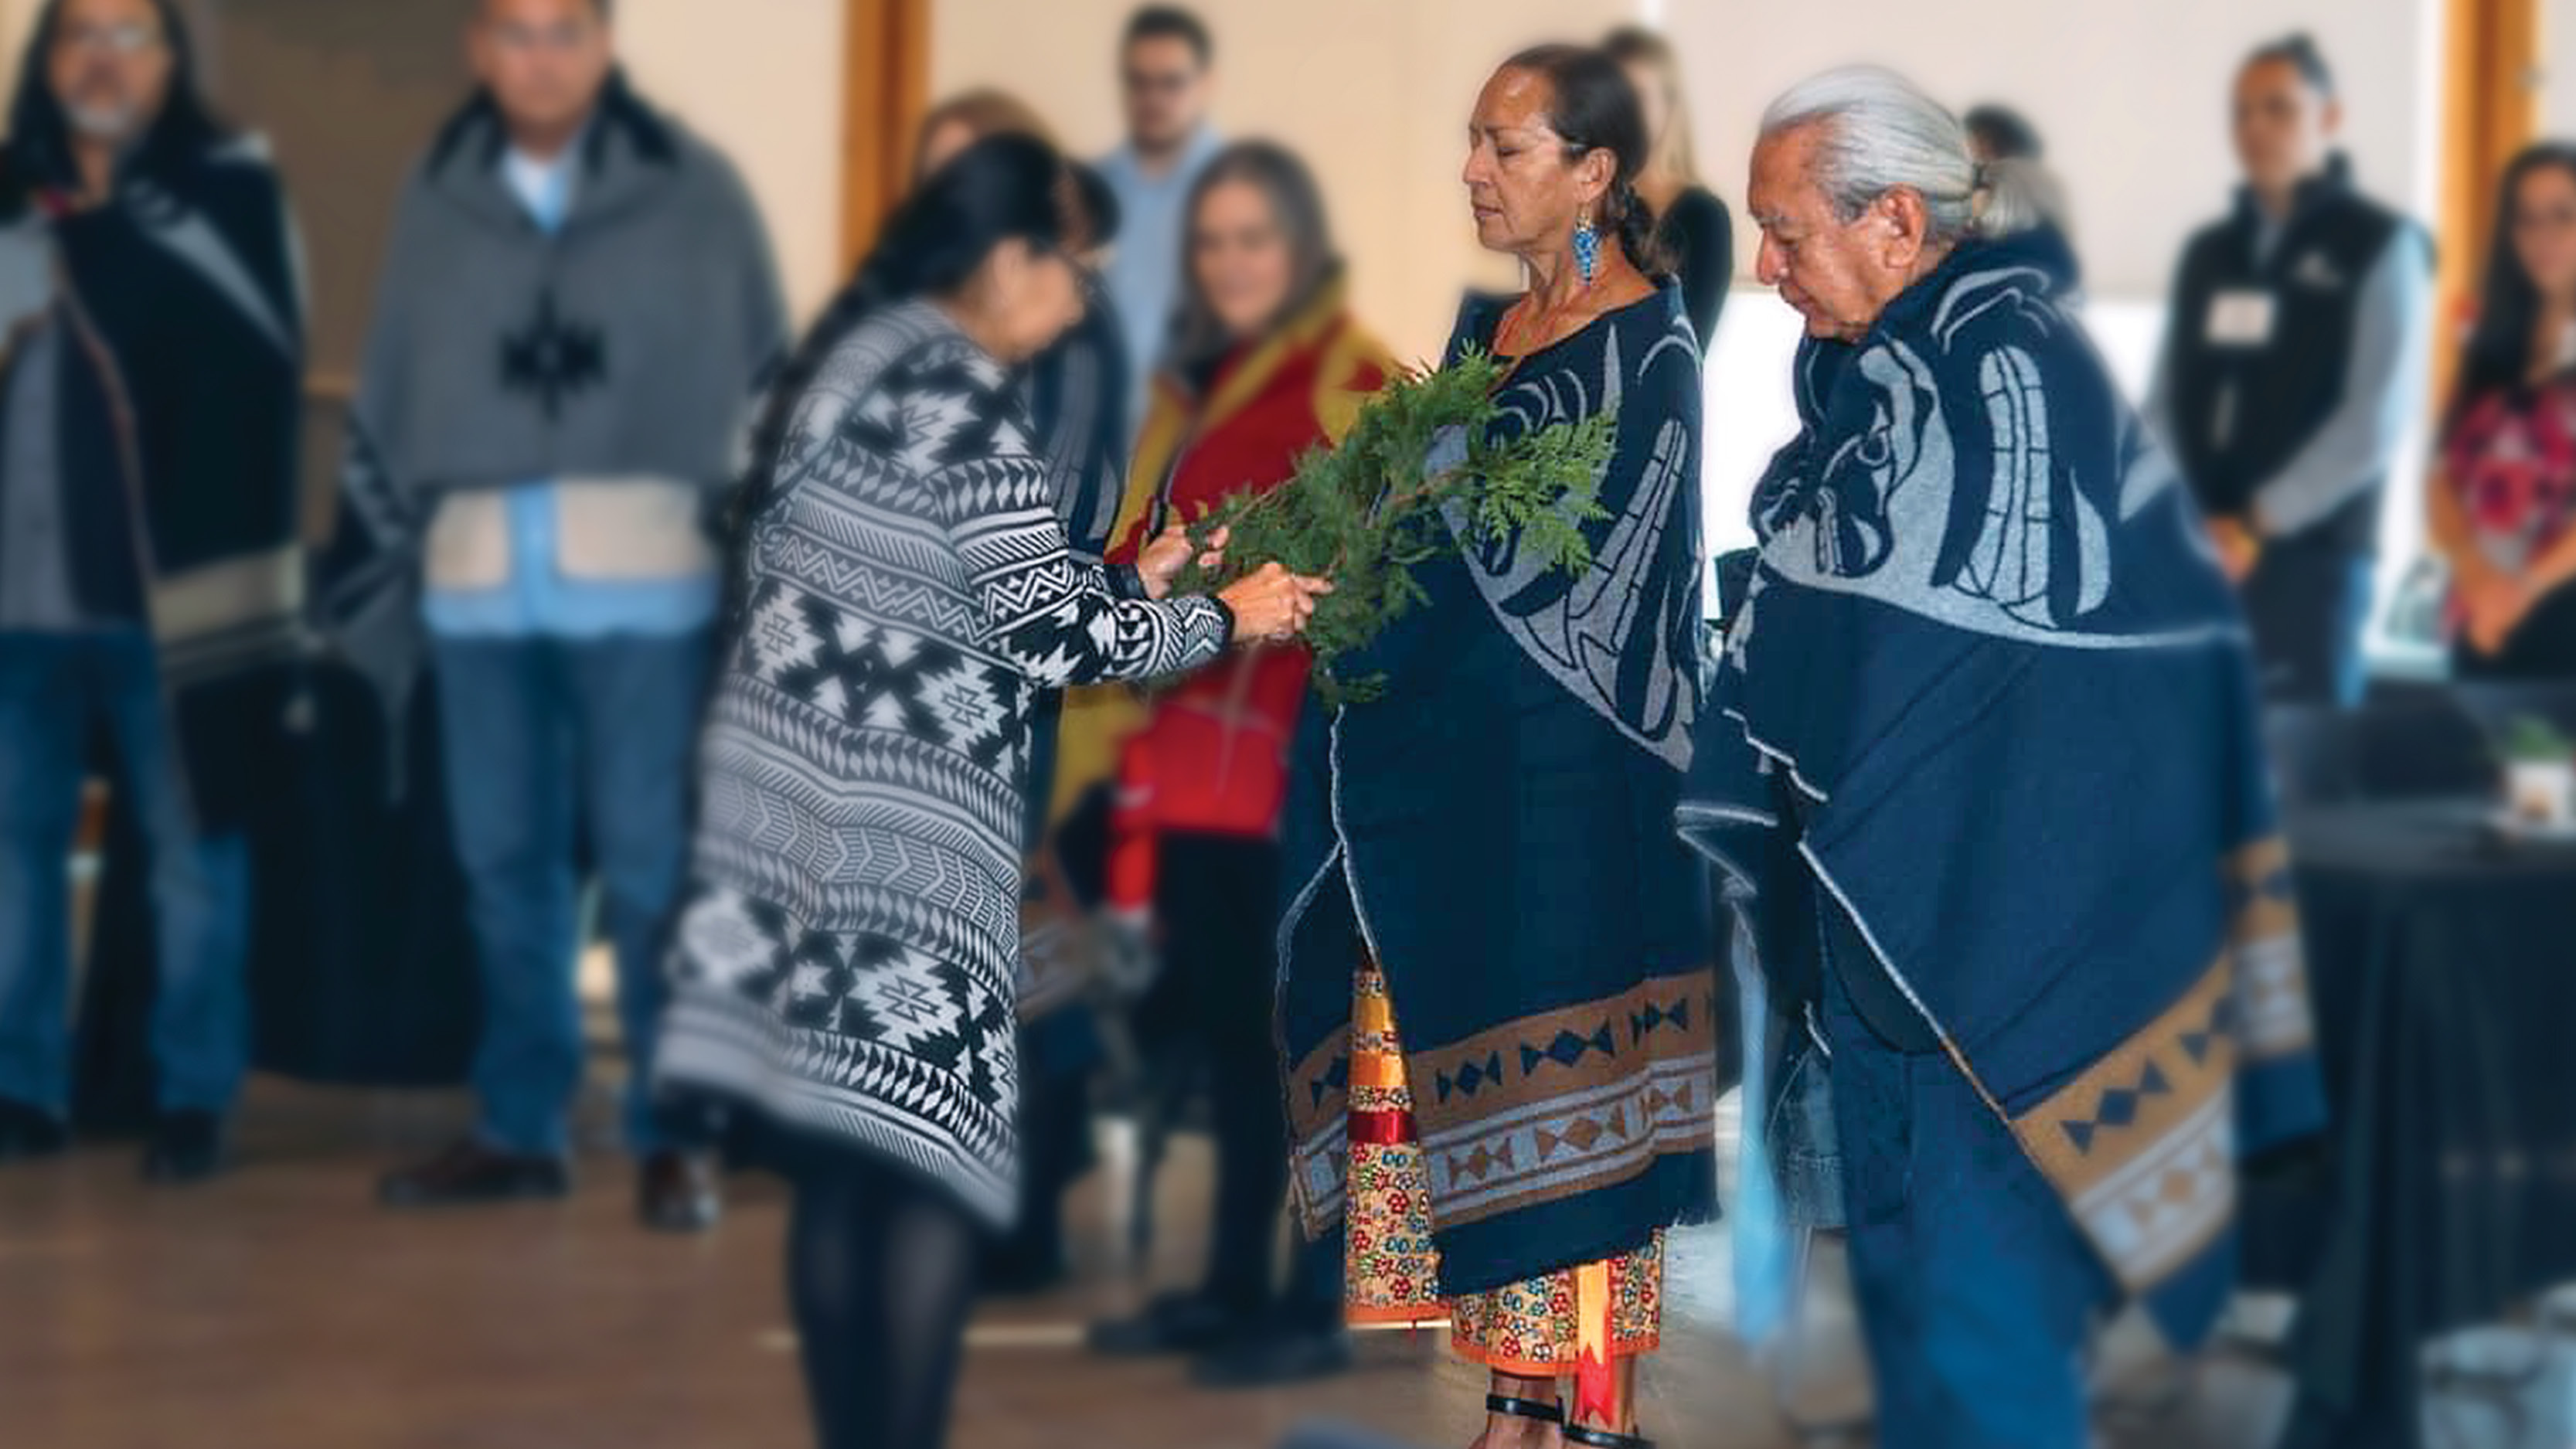 Dr. Nel Wieman and Elder Gerry Oleman are blanketed in a recent ceremony celebrating their work as co-chairs of the Technical Committee that developed the first provincial Cultural Safety and Humility Standard in B.C.